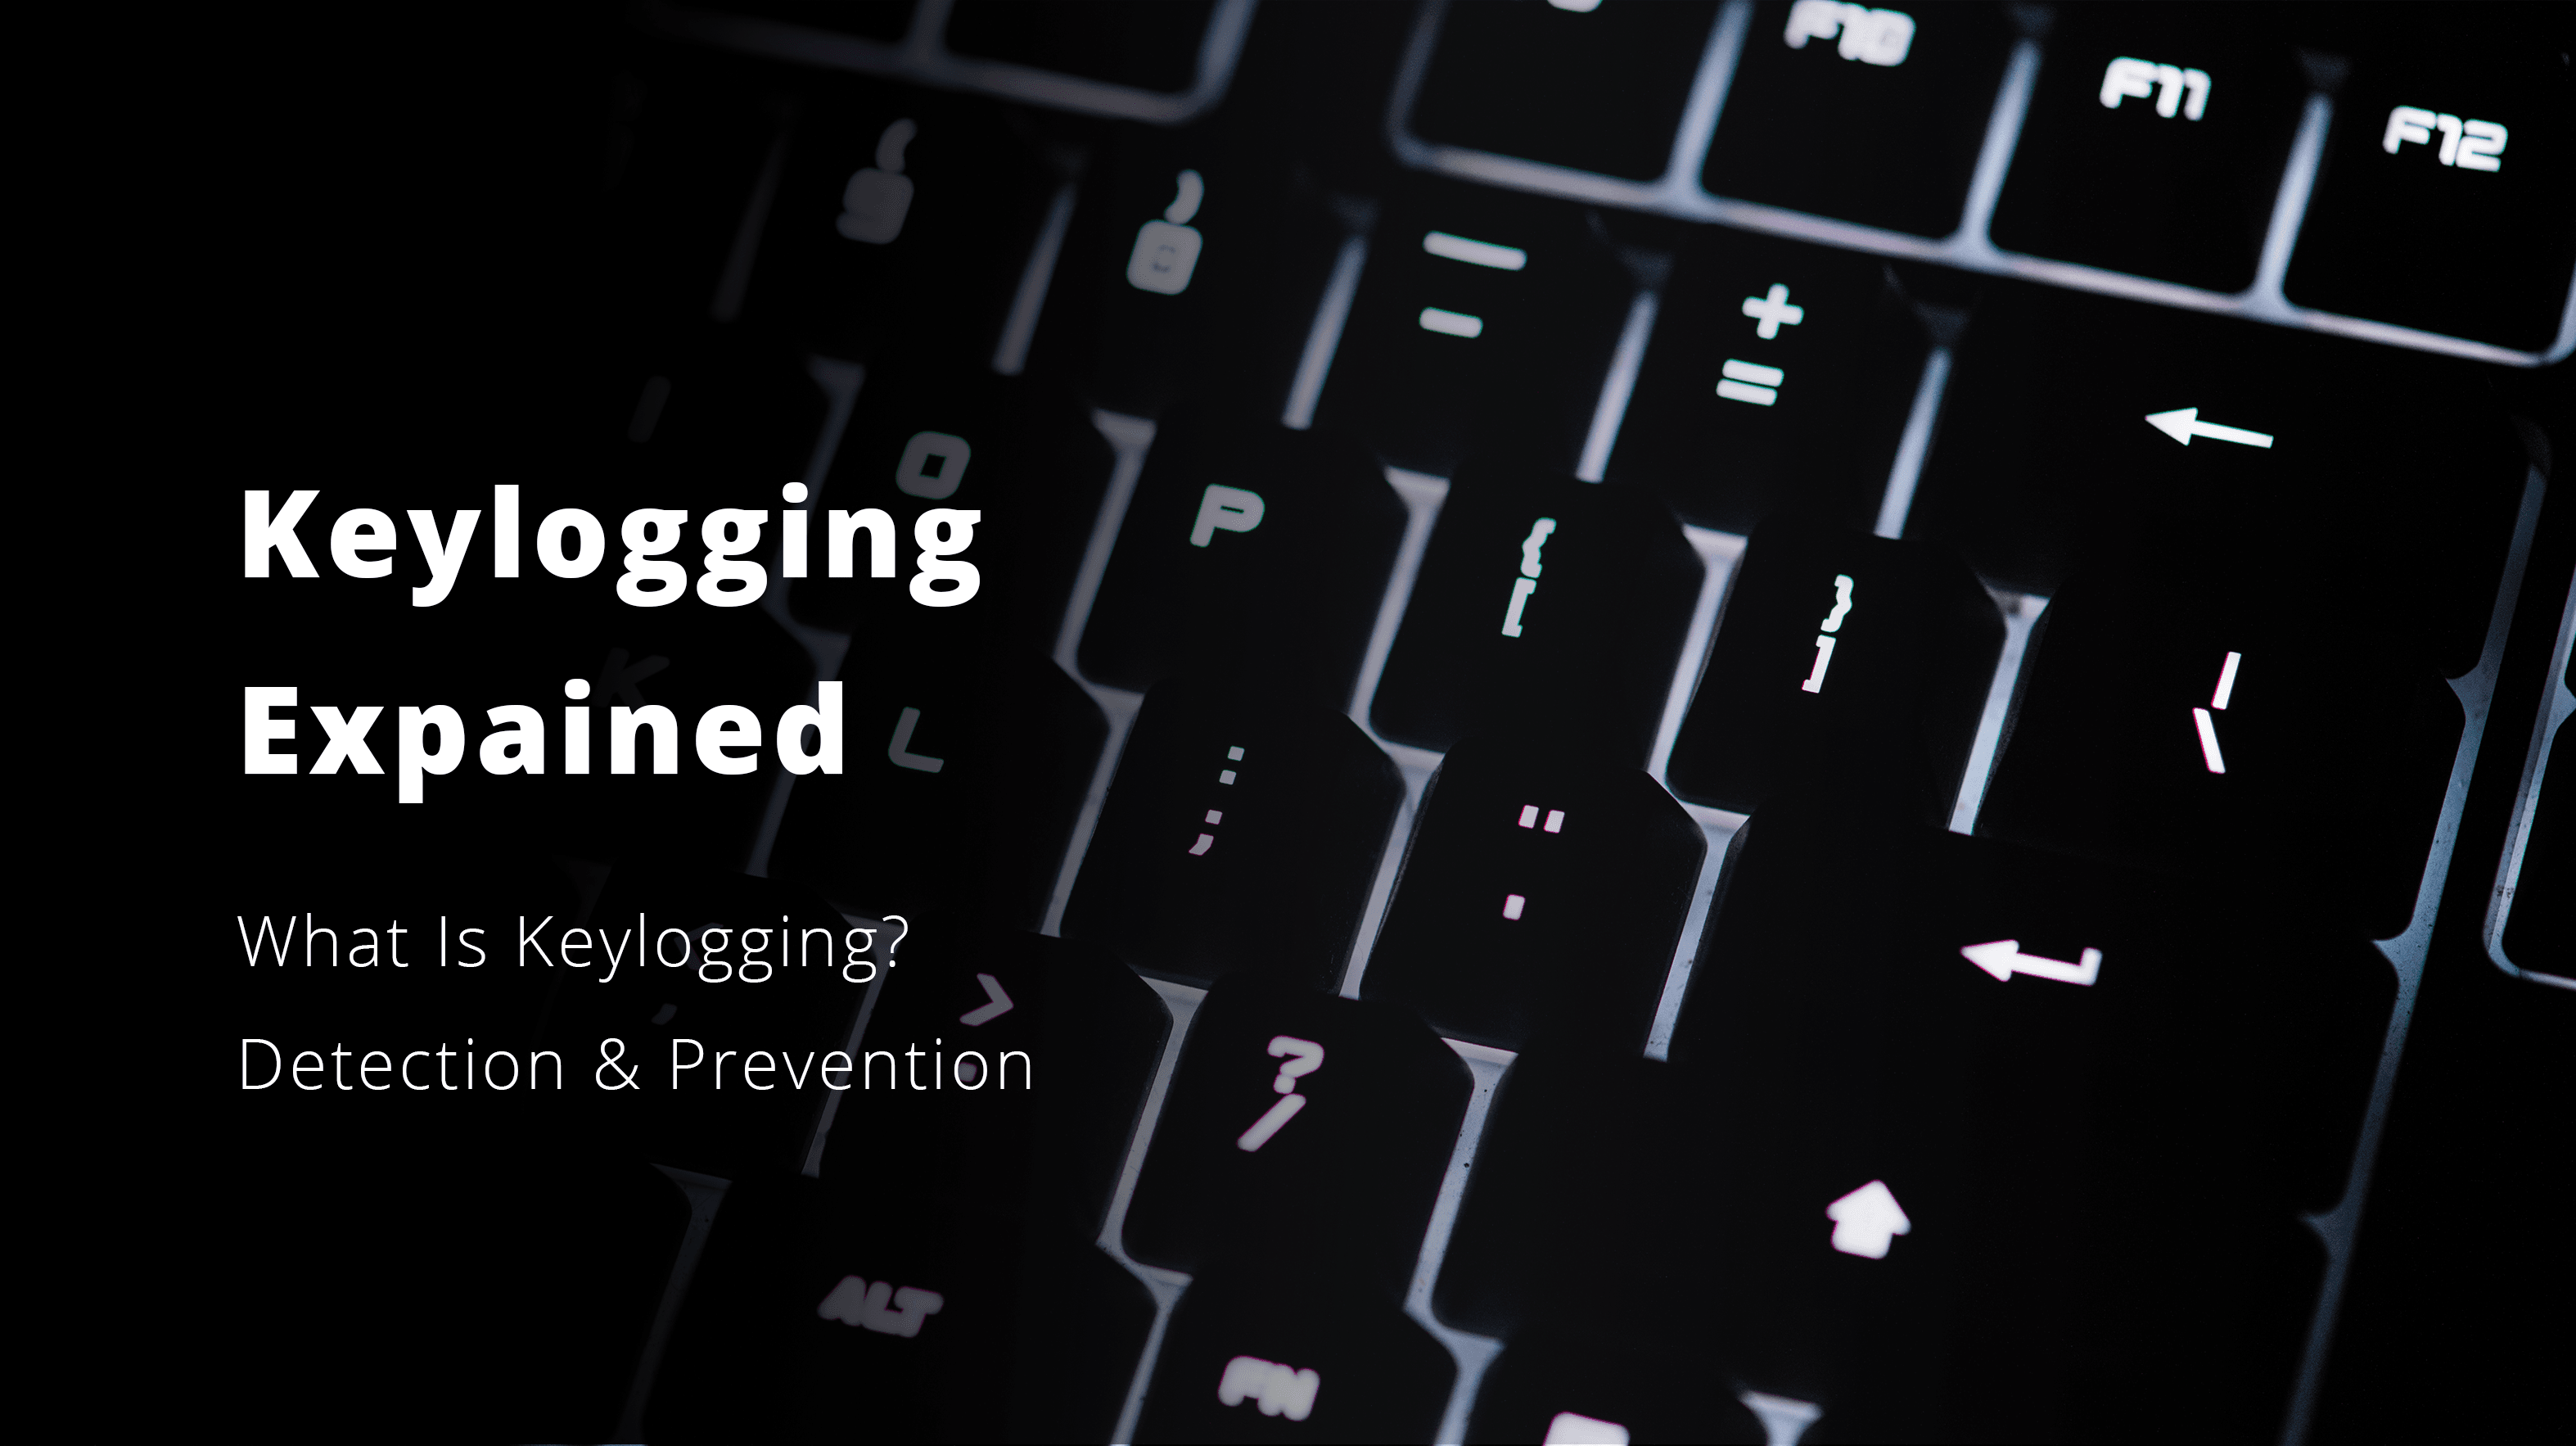 <b>What is Keylogging? Tips on How to Detect and Prevent Keylogging</b>